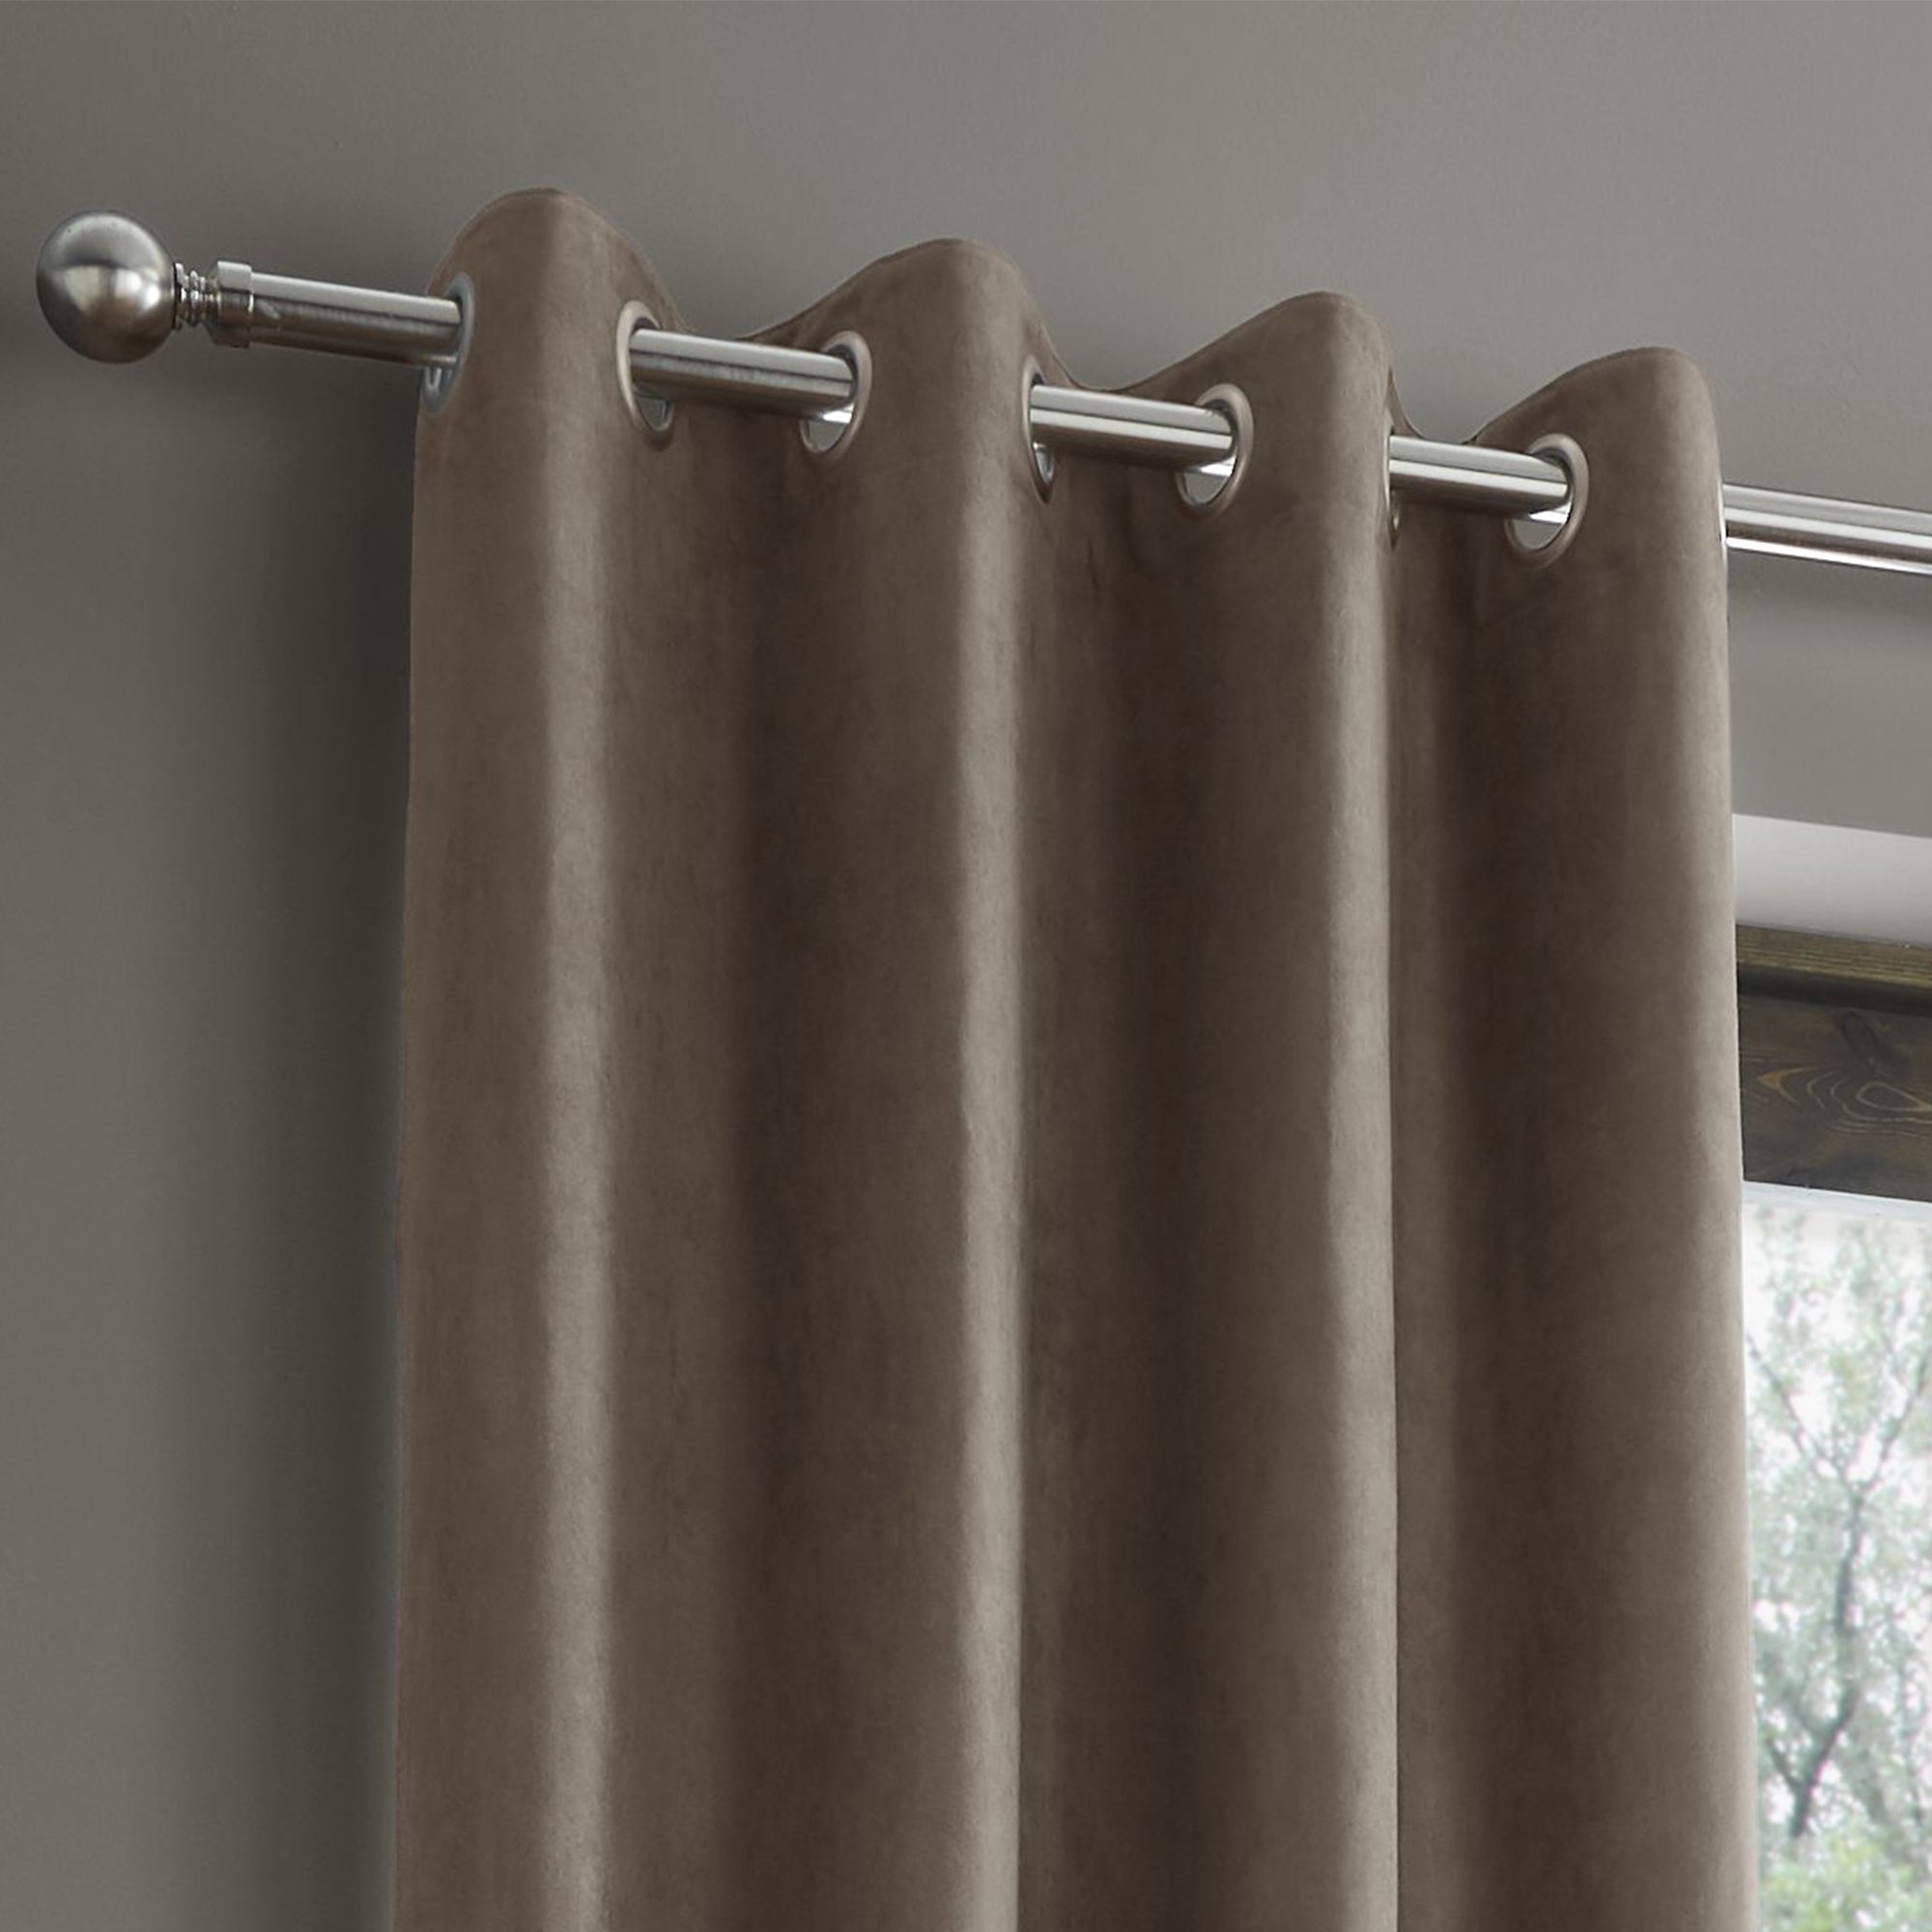 Photos - Curtains & Drapes Catherine Lansfield Faux Suede Mink Eyelet Curtains Mink 